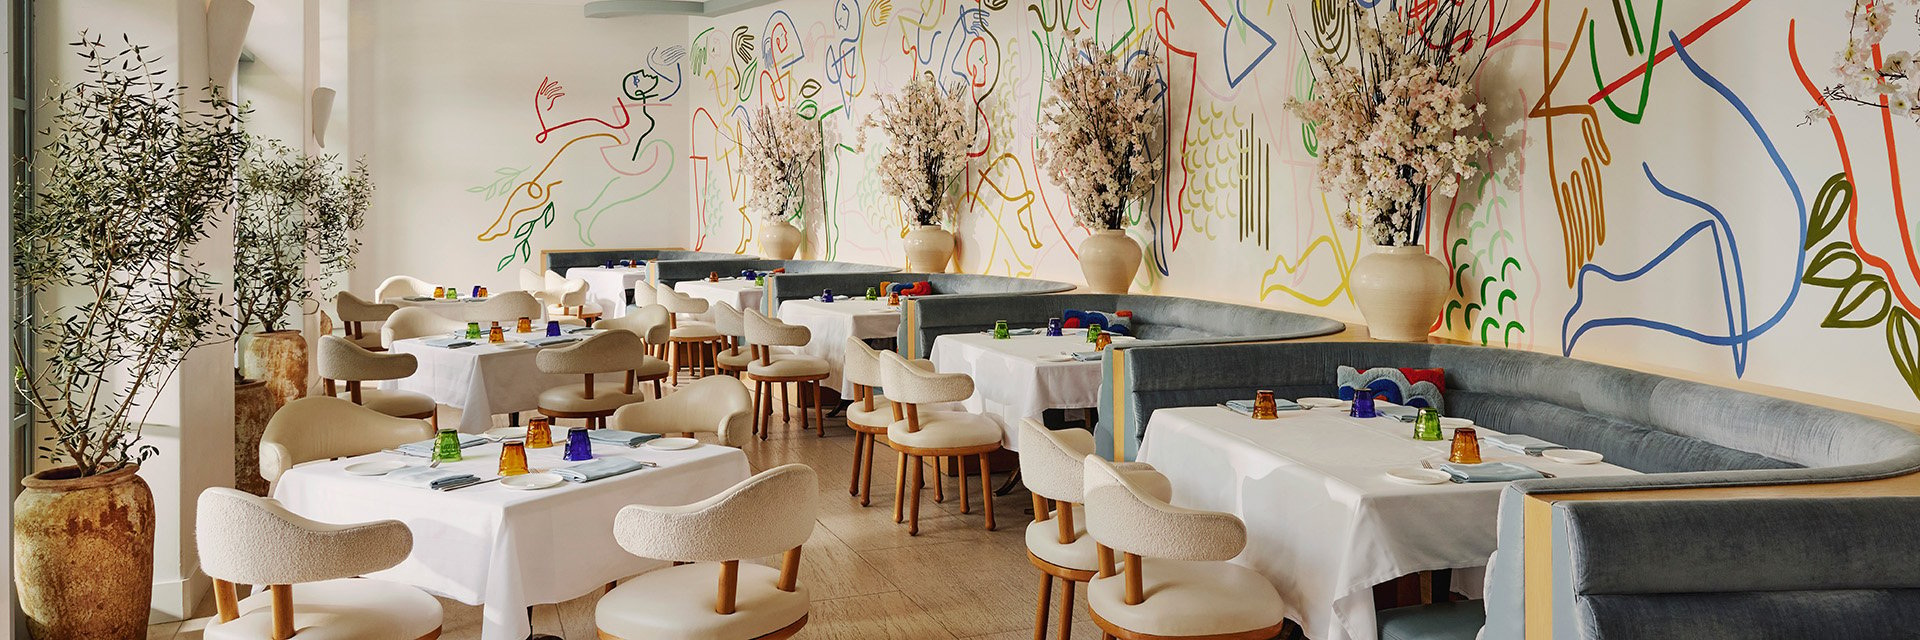 A restaurant's dining space showcases trendy decor with wall graffiti, enhancing its distinctive character.